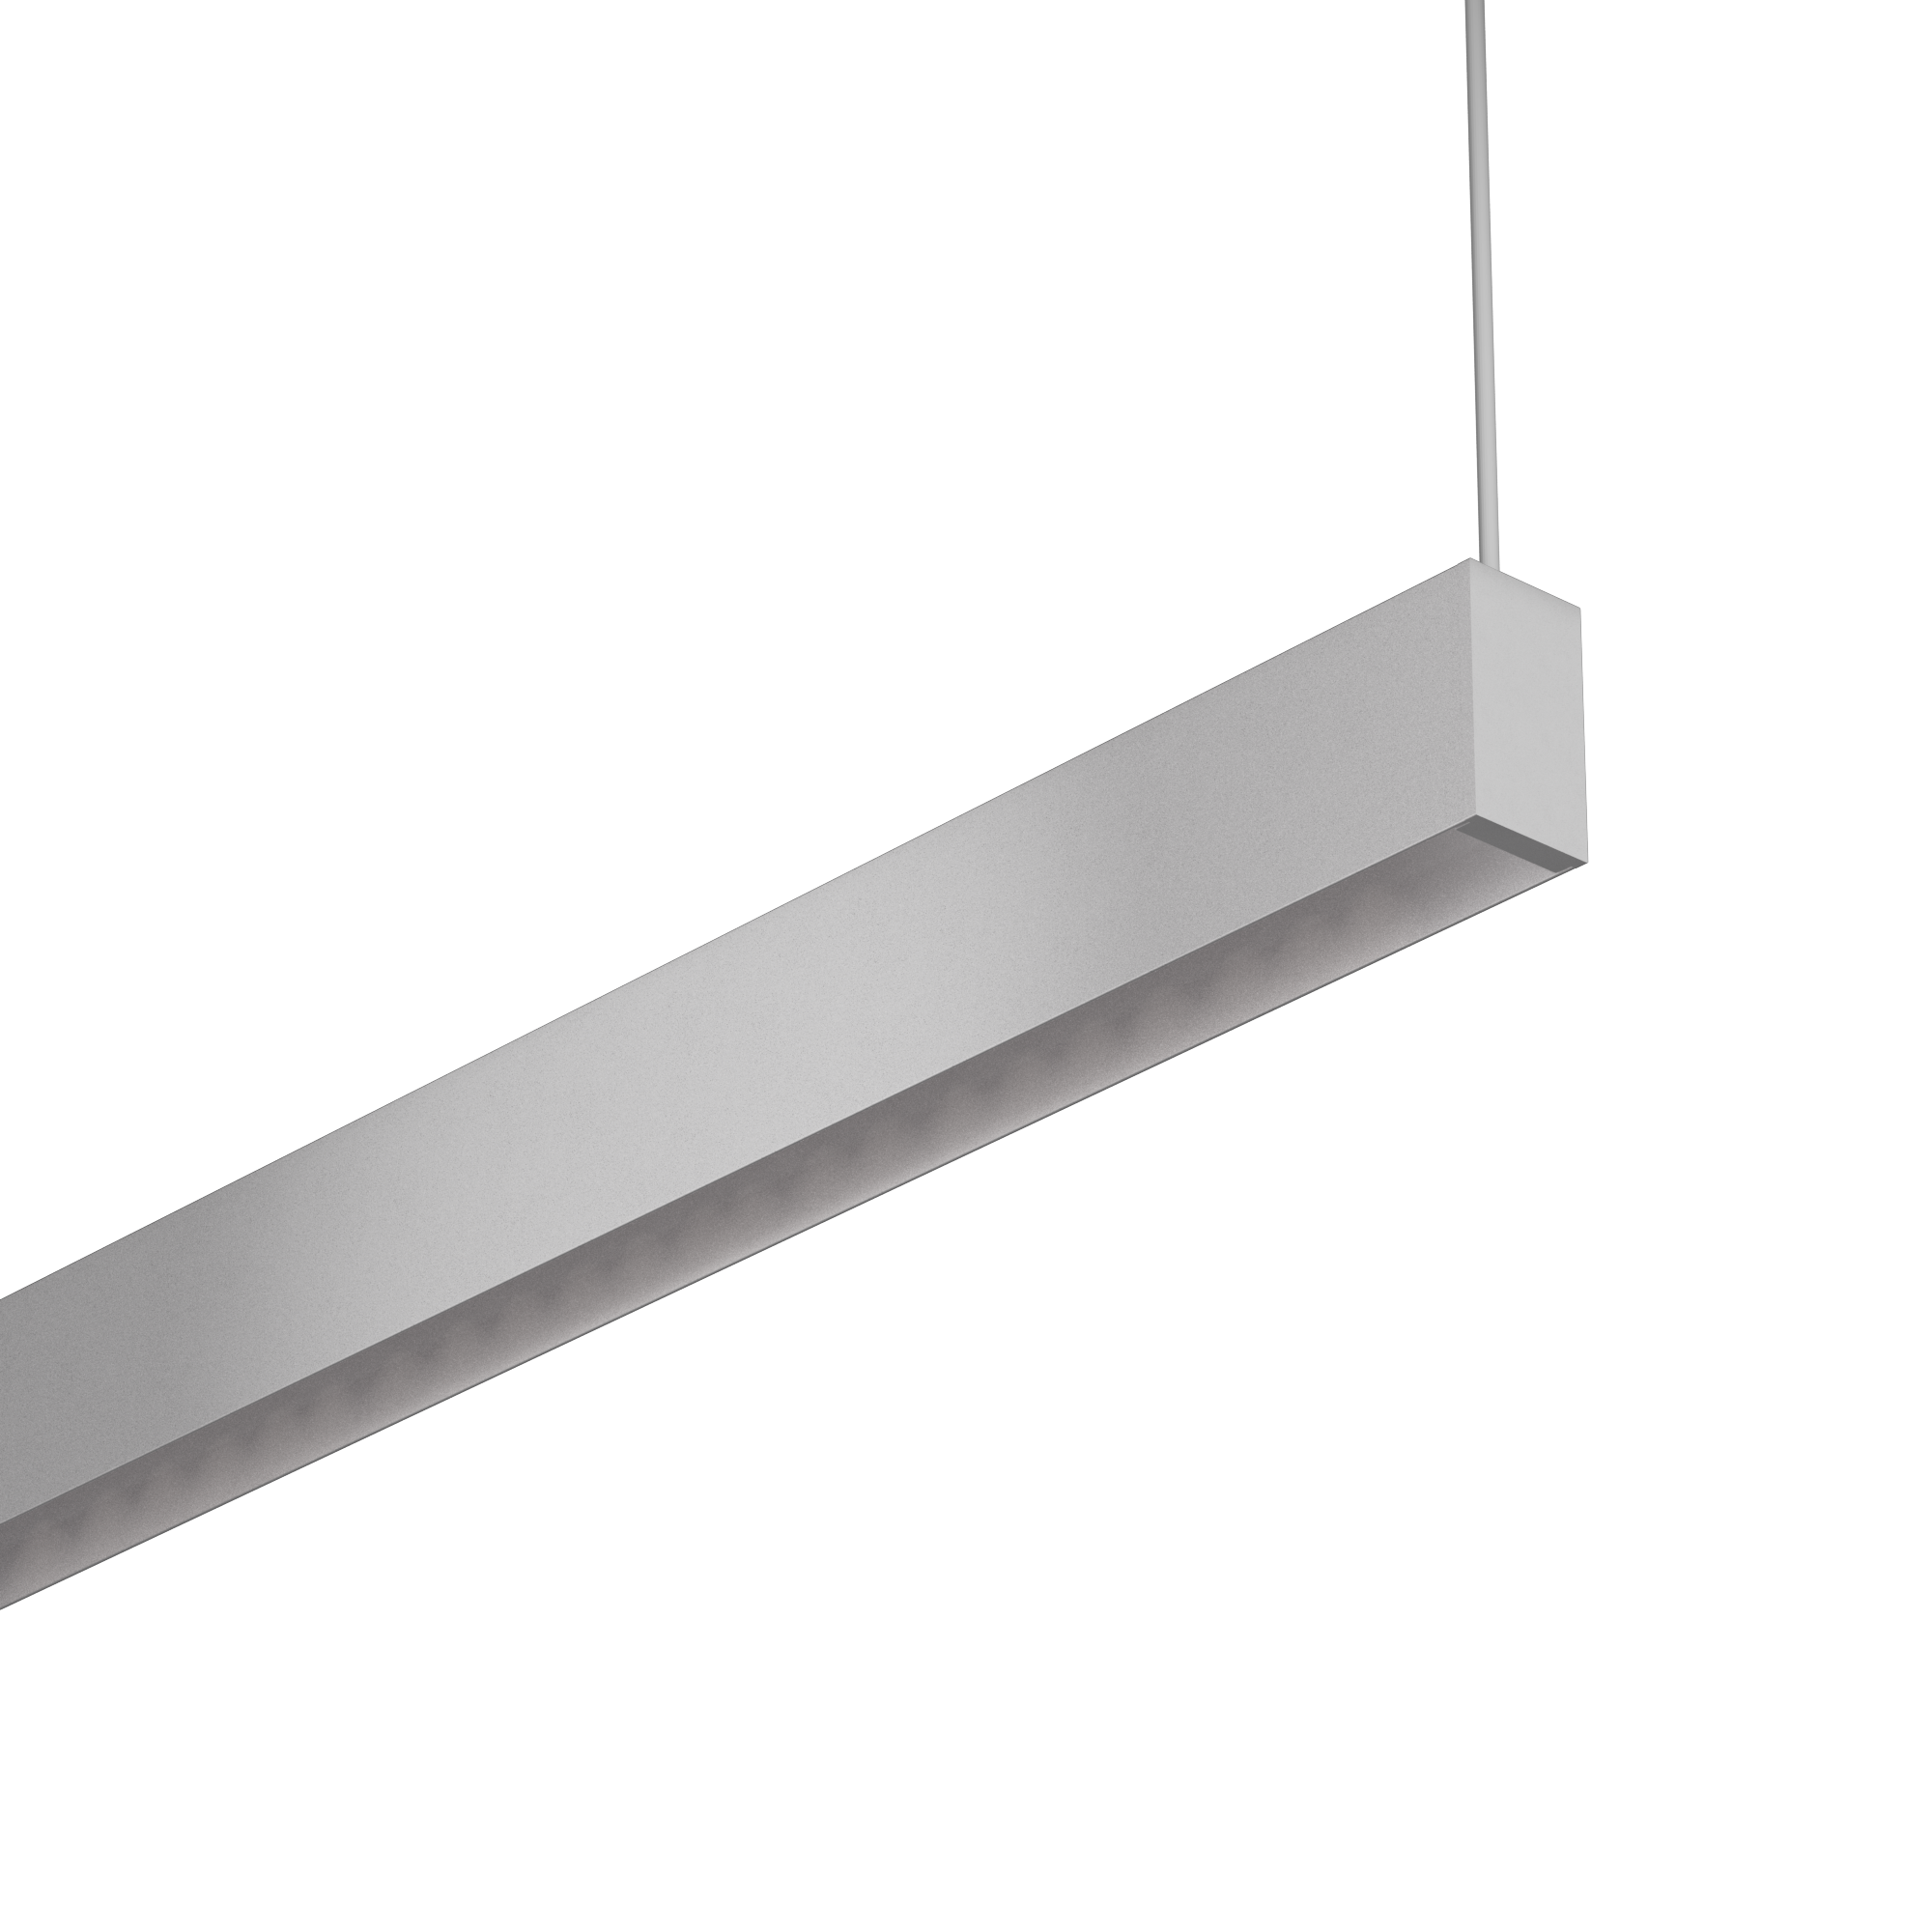 0.95” Ultra-Compact LED Linear
NANOBeam is 0.95” wide, bringing regressed SmartBeam® capabilities to a low-glare form factor that complements architectural space. NANOBeam features a remote driver to remove visual bulk. Optional Individual lenses and parabolic reflectors are located below each LED using Nano-Cavity Optics (NCO). For greater comfort, the regulated beam lowers glare and adjusts the light output. These concentrated distributions are ideal for a wide range of task-specific requirements. At cut-off, NCO has a softer appearance, a larger beam spread, and a gradual brightness transition.

 

Beam profile: 0.95” (24mm) x 1.73” (44mm)